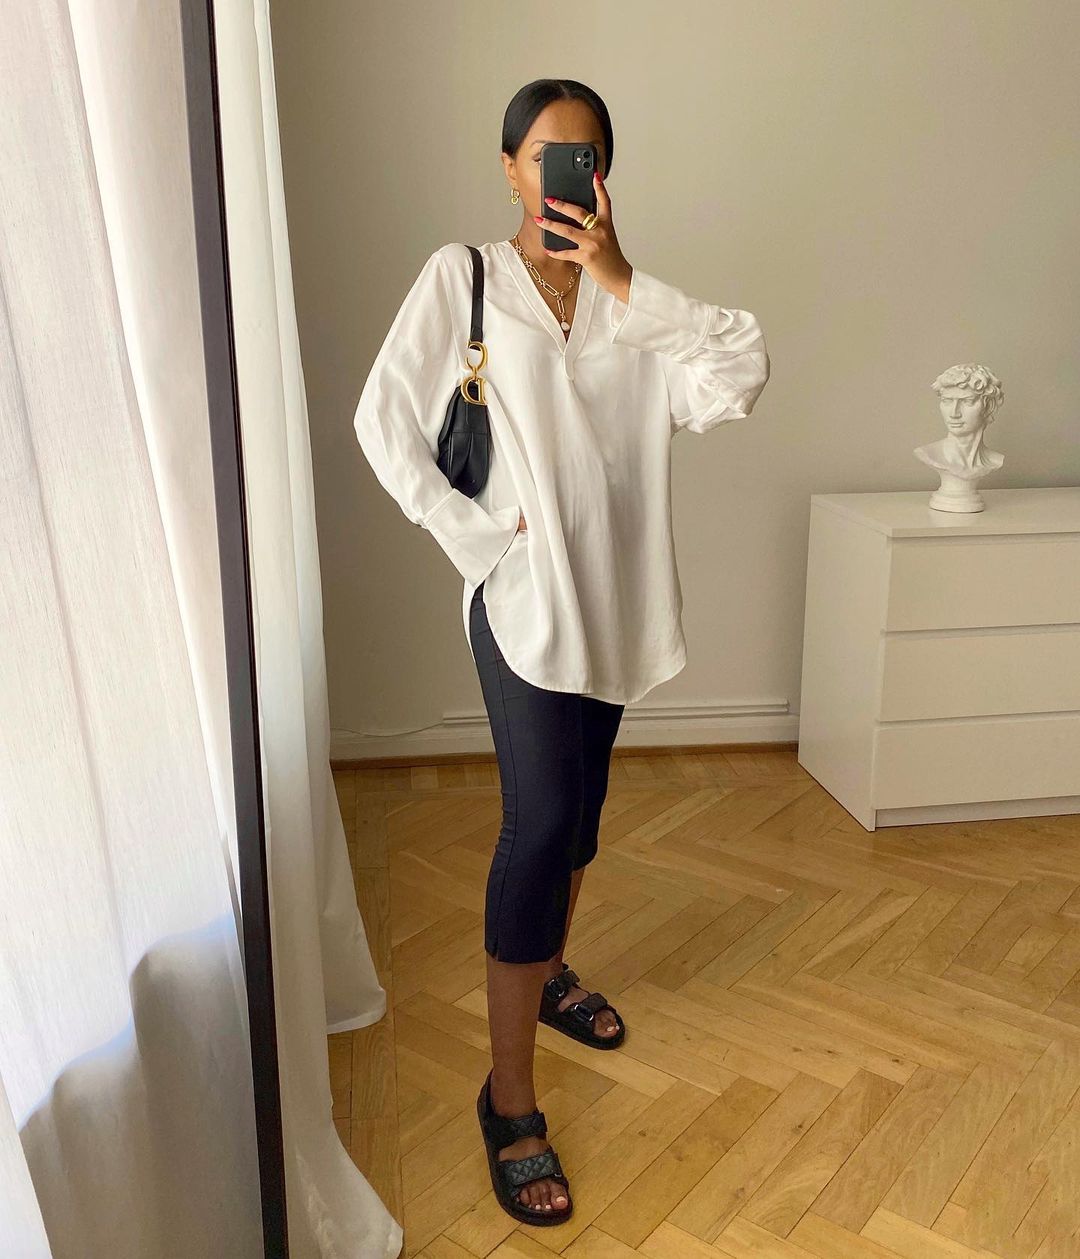 Leggings and Sandal Outfits: @femmeblk wears a loose-fitting blouse with leggings